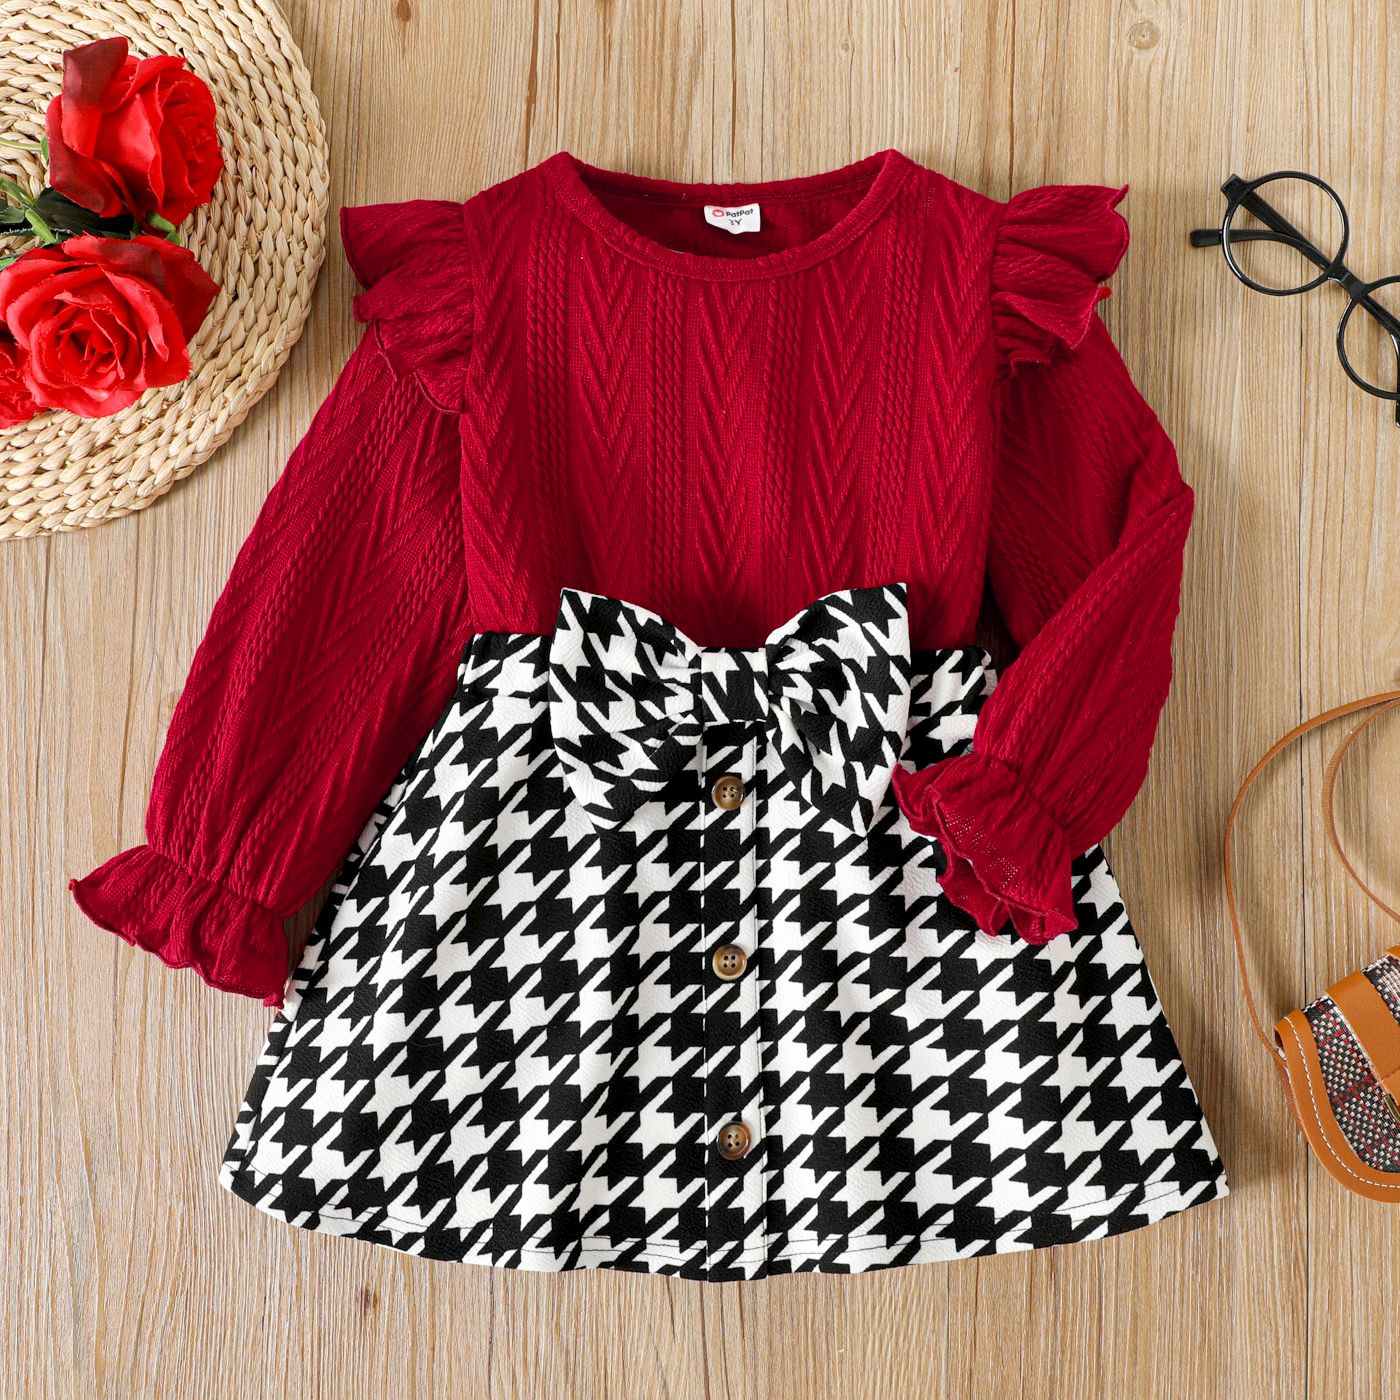 2pcs Toddler Girl Ruffled Textured Tee and Bowknot Design Houndstooth Skirt Set